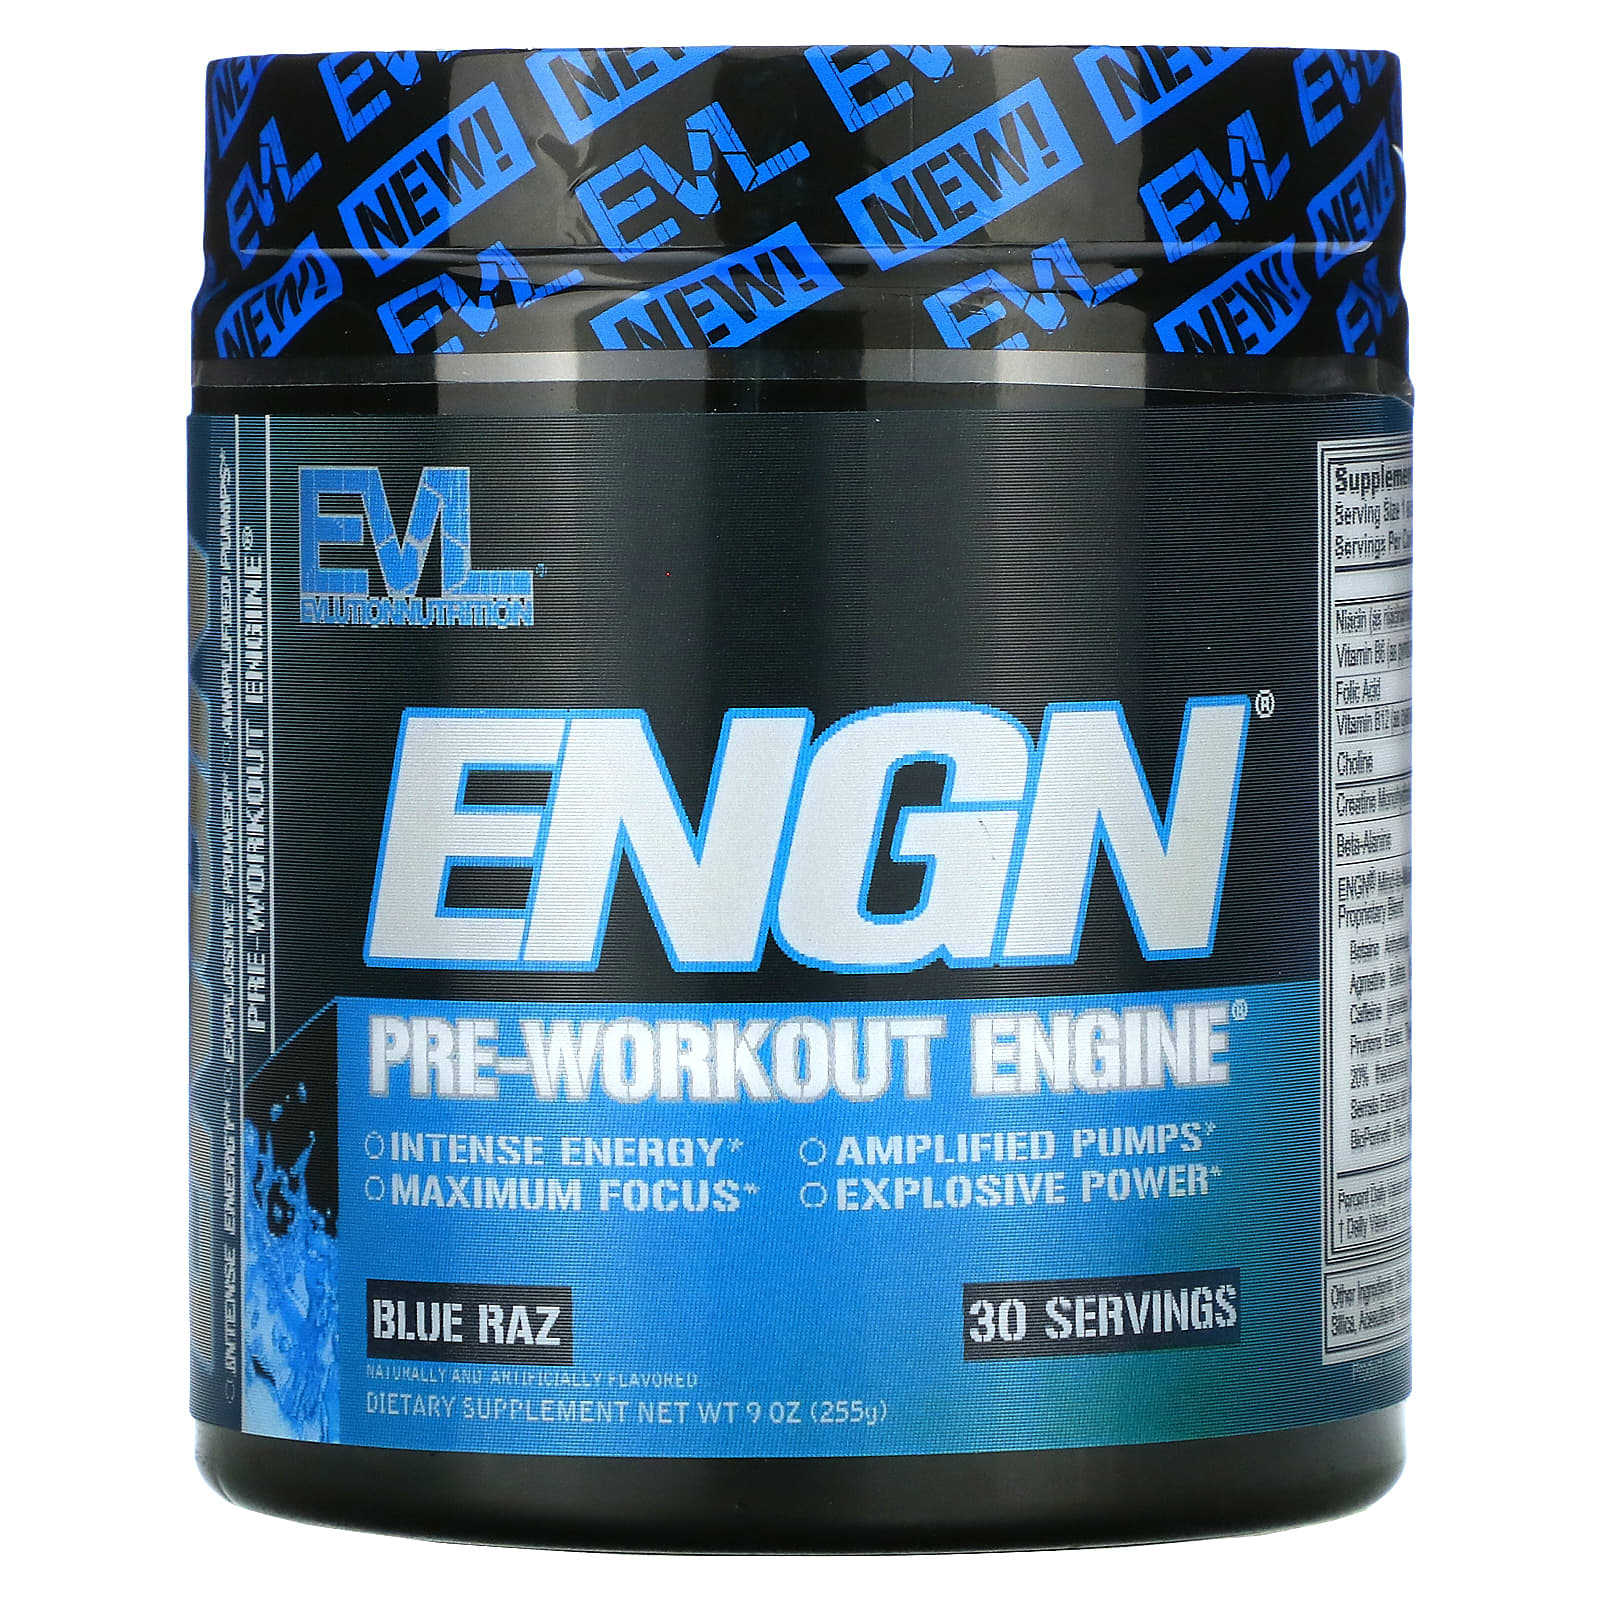 Engn pre workout engine